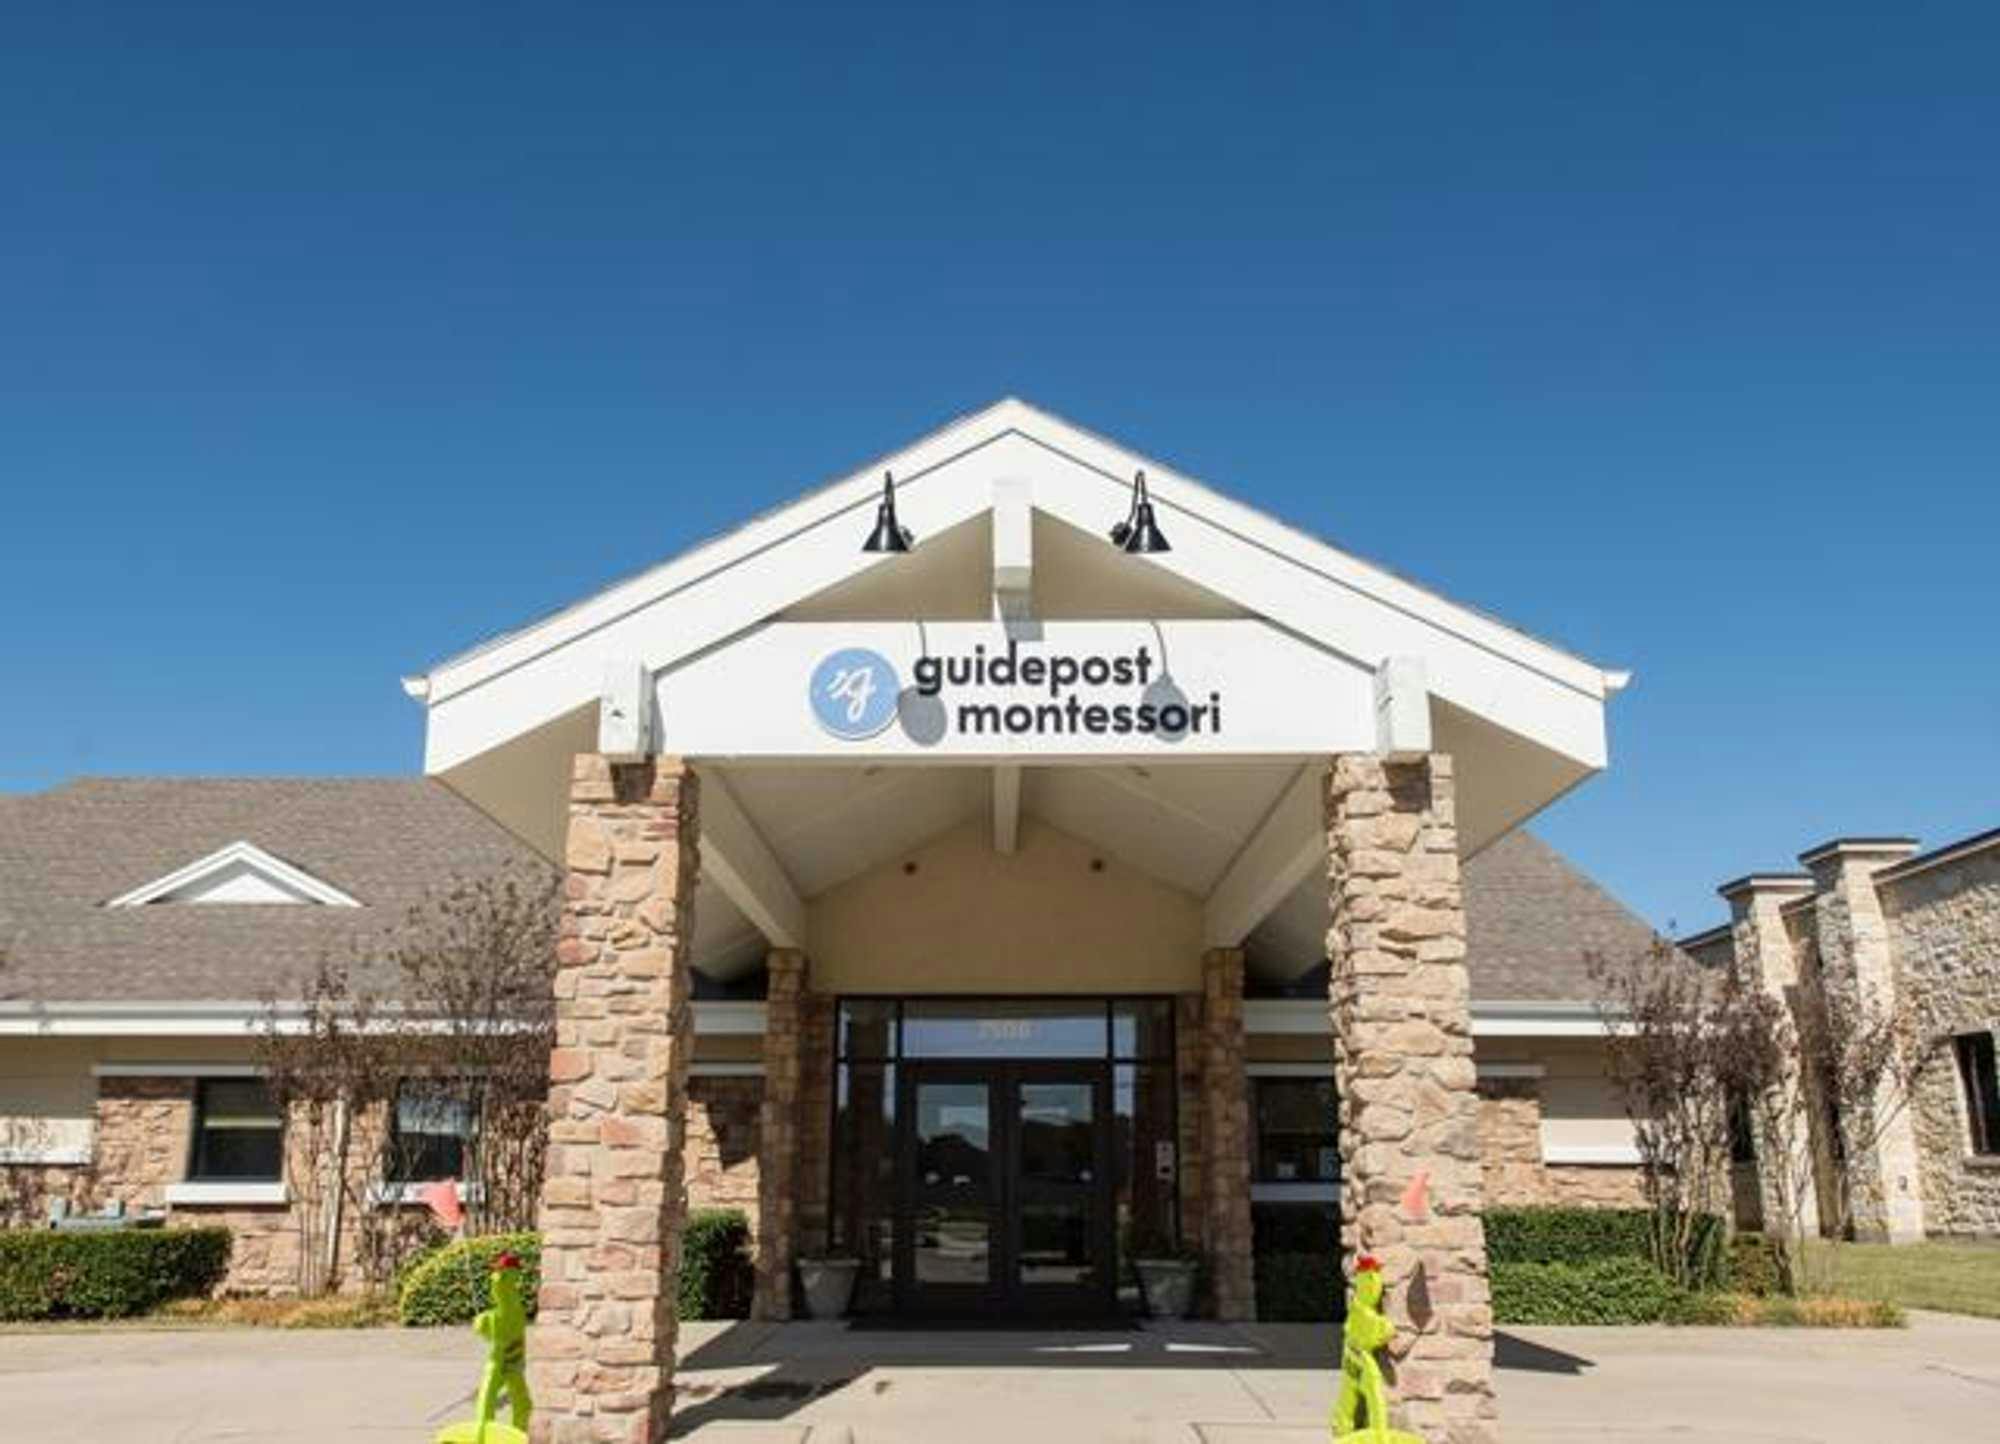 View of Guidepost Montessori at Eldorado from the pillared entryway that shows the stone exterior and entrance door, as well as a branded Guidepost Montessori sign.